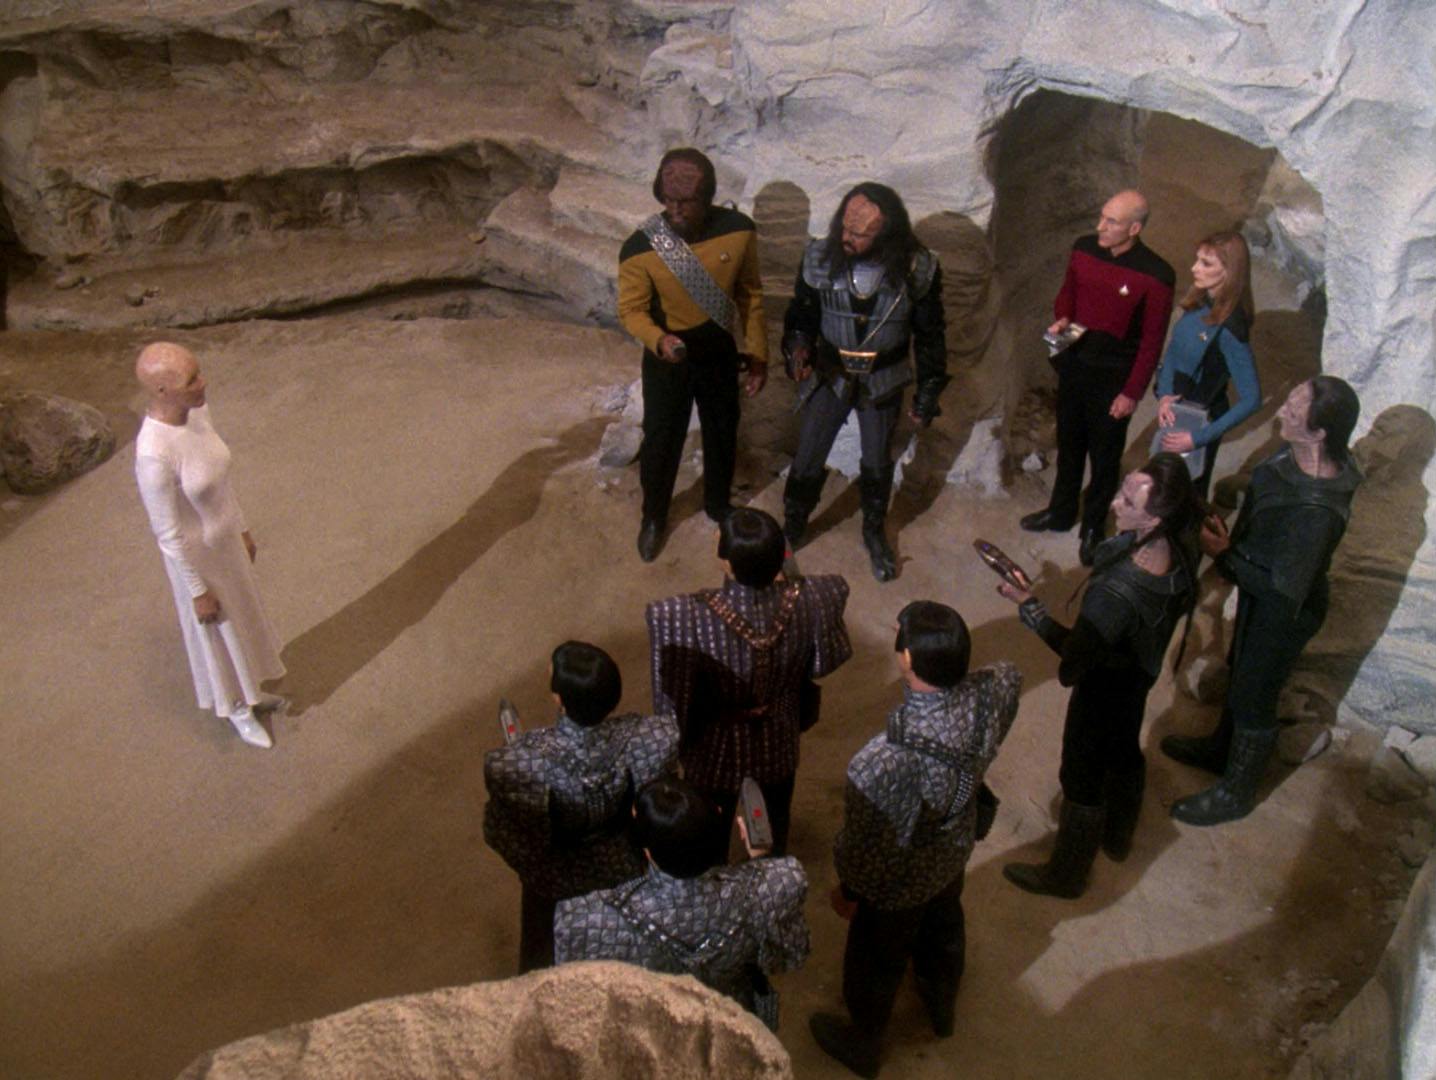 On the surface of Vilmor II, a Progenitor disrupts an argument between the Enterprise away team, the Cardassians, Klingon, and Romulans in 'The Chase'